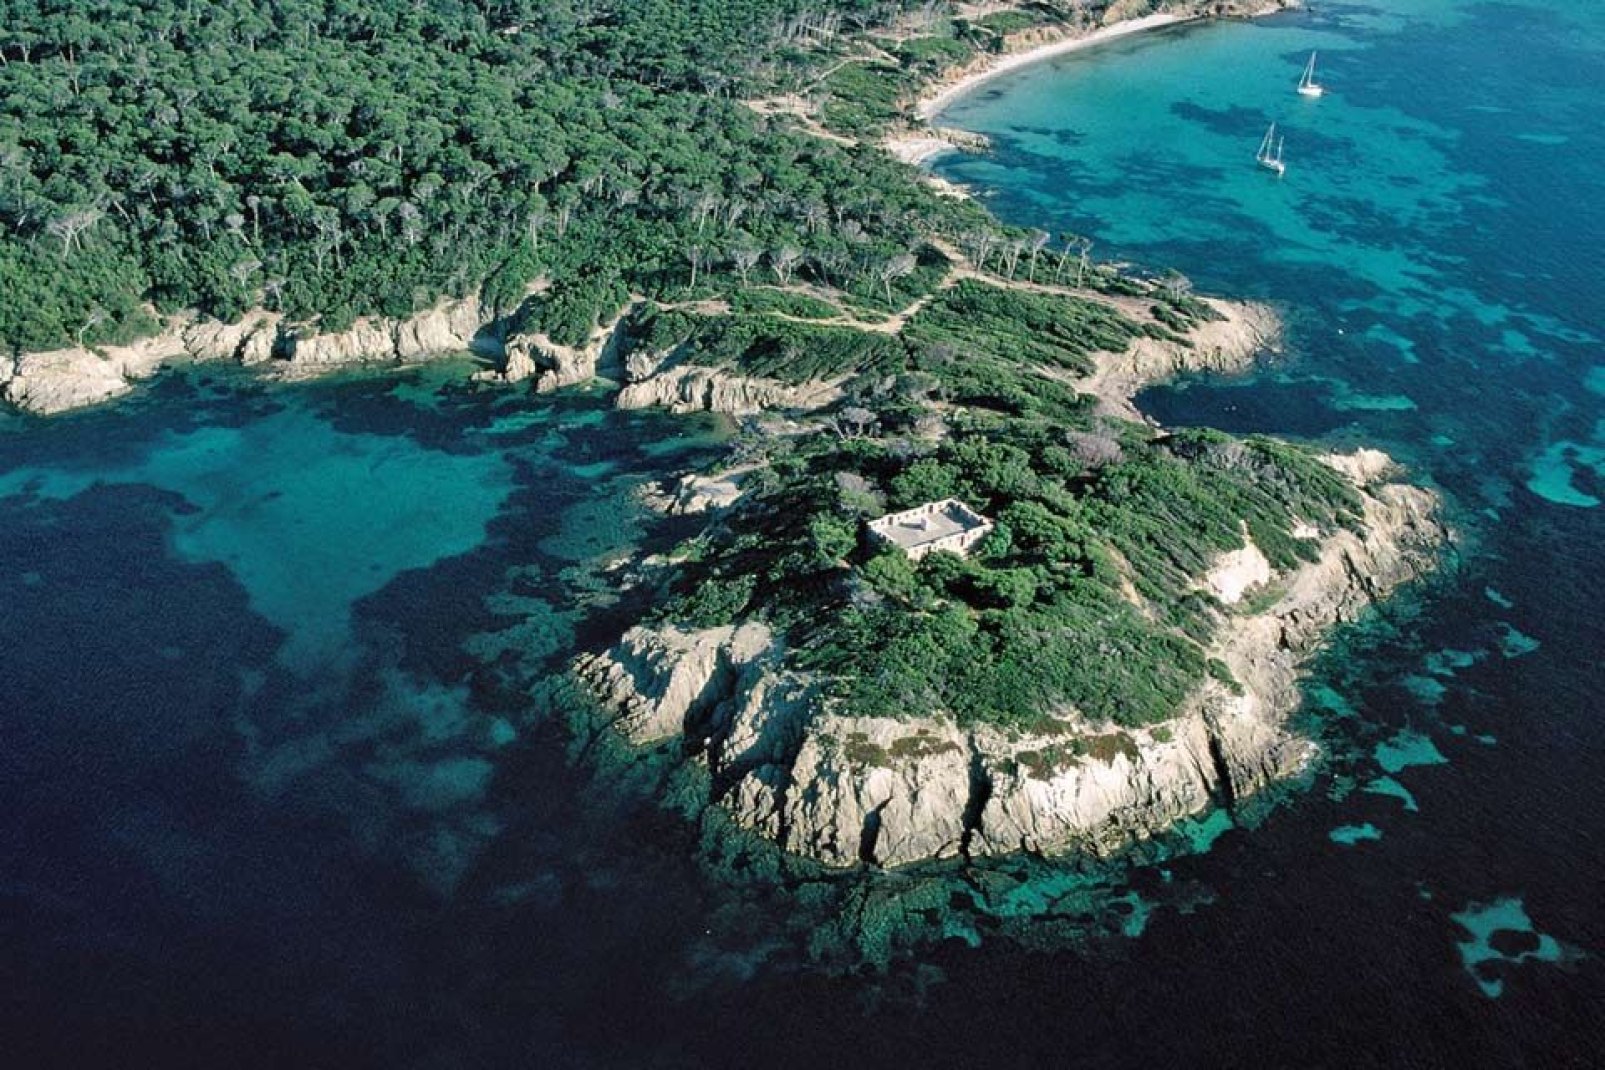 This is the largest of the Hyères Islands. Loaded with history, the island is a genuine haven of peace.